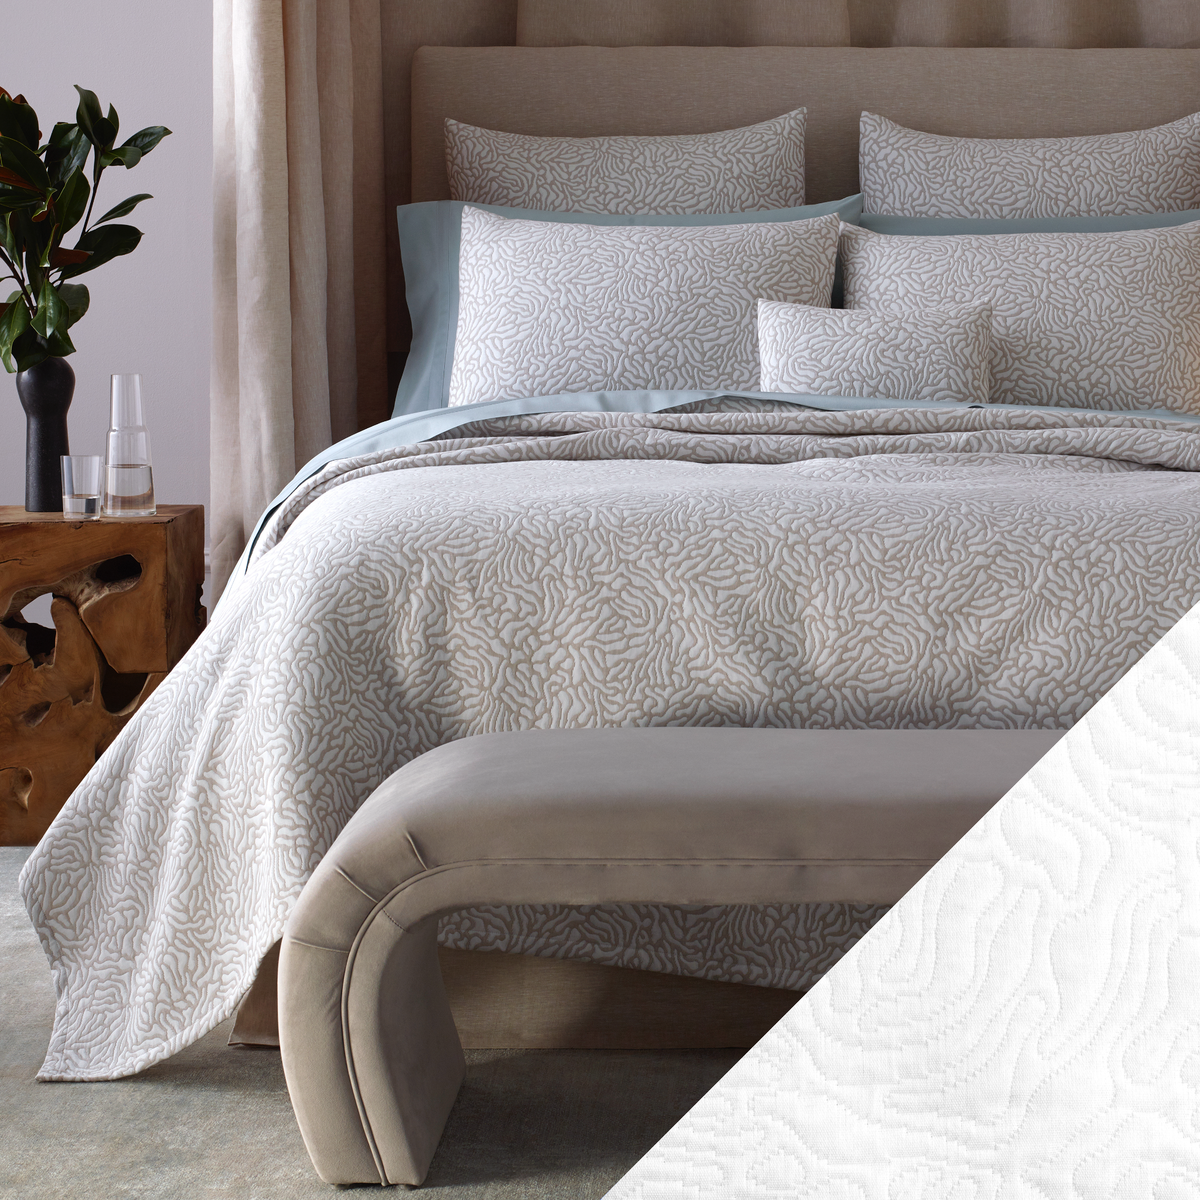 Full Bed Dressed in Matouk Schumacher Cora Bedding in Natural White Color with White Swatch